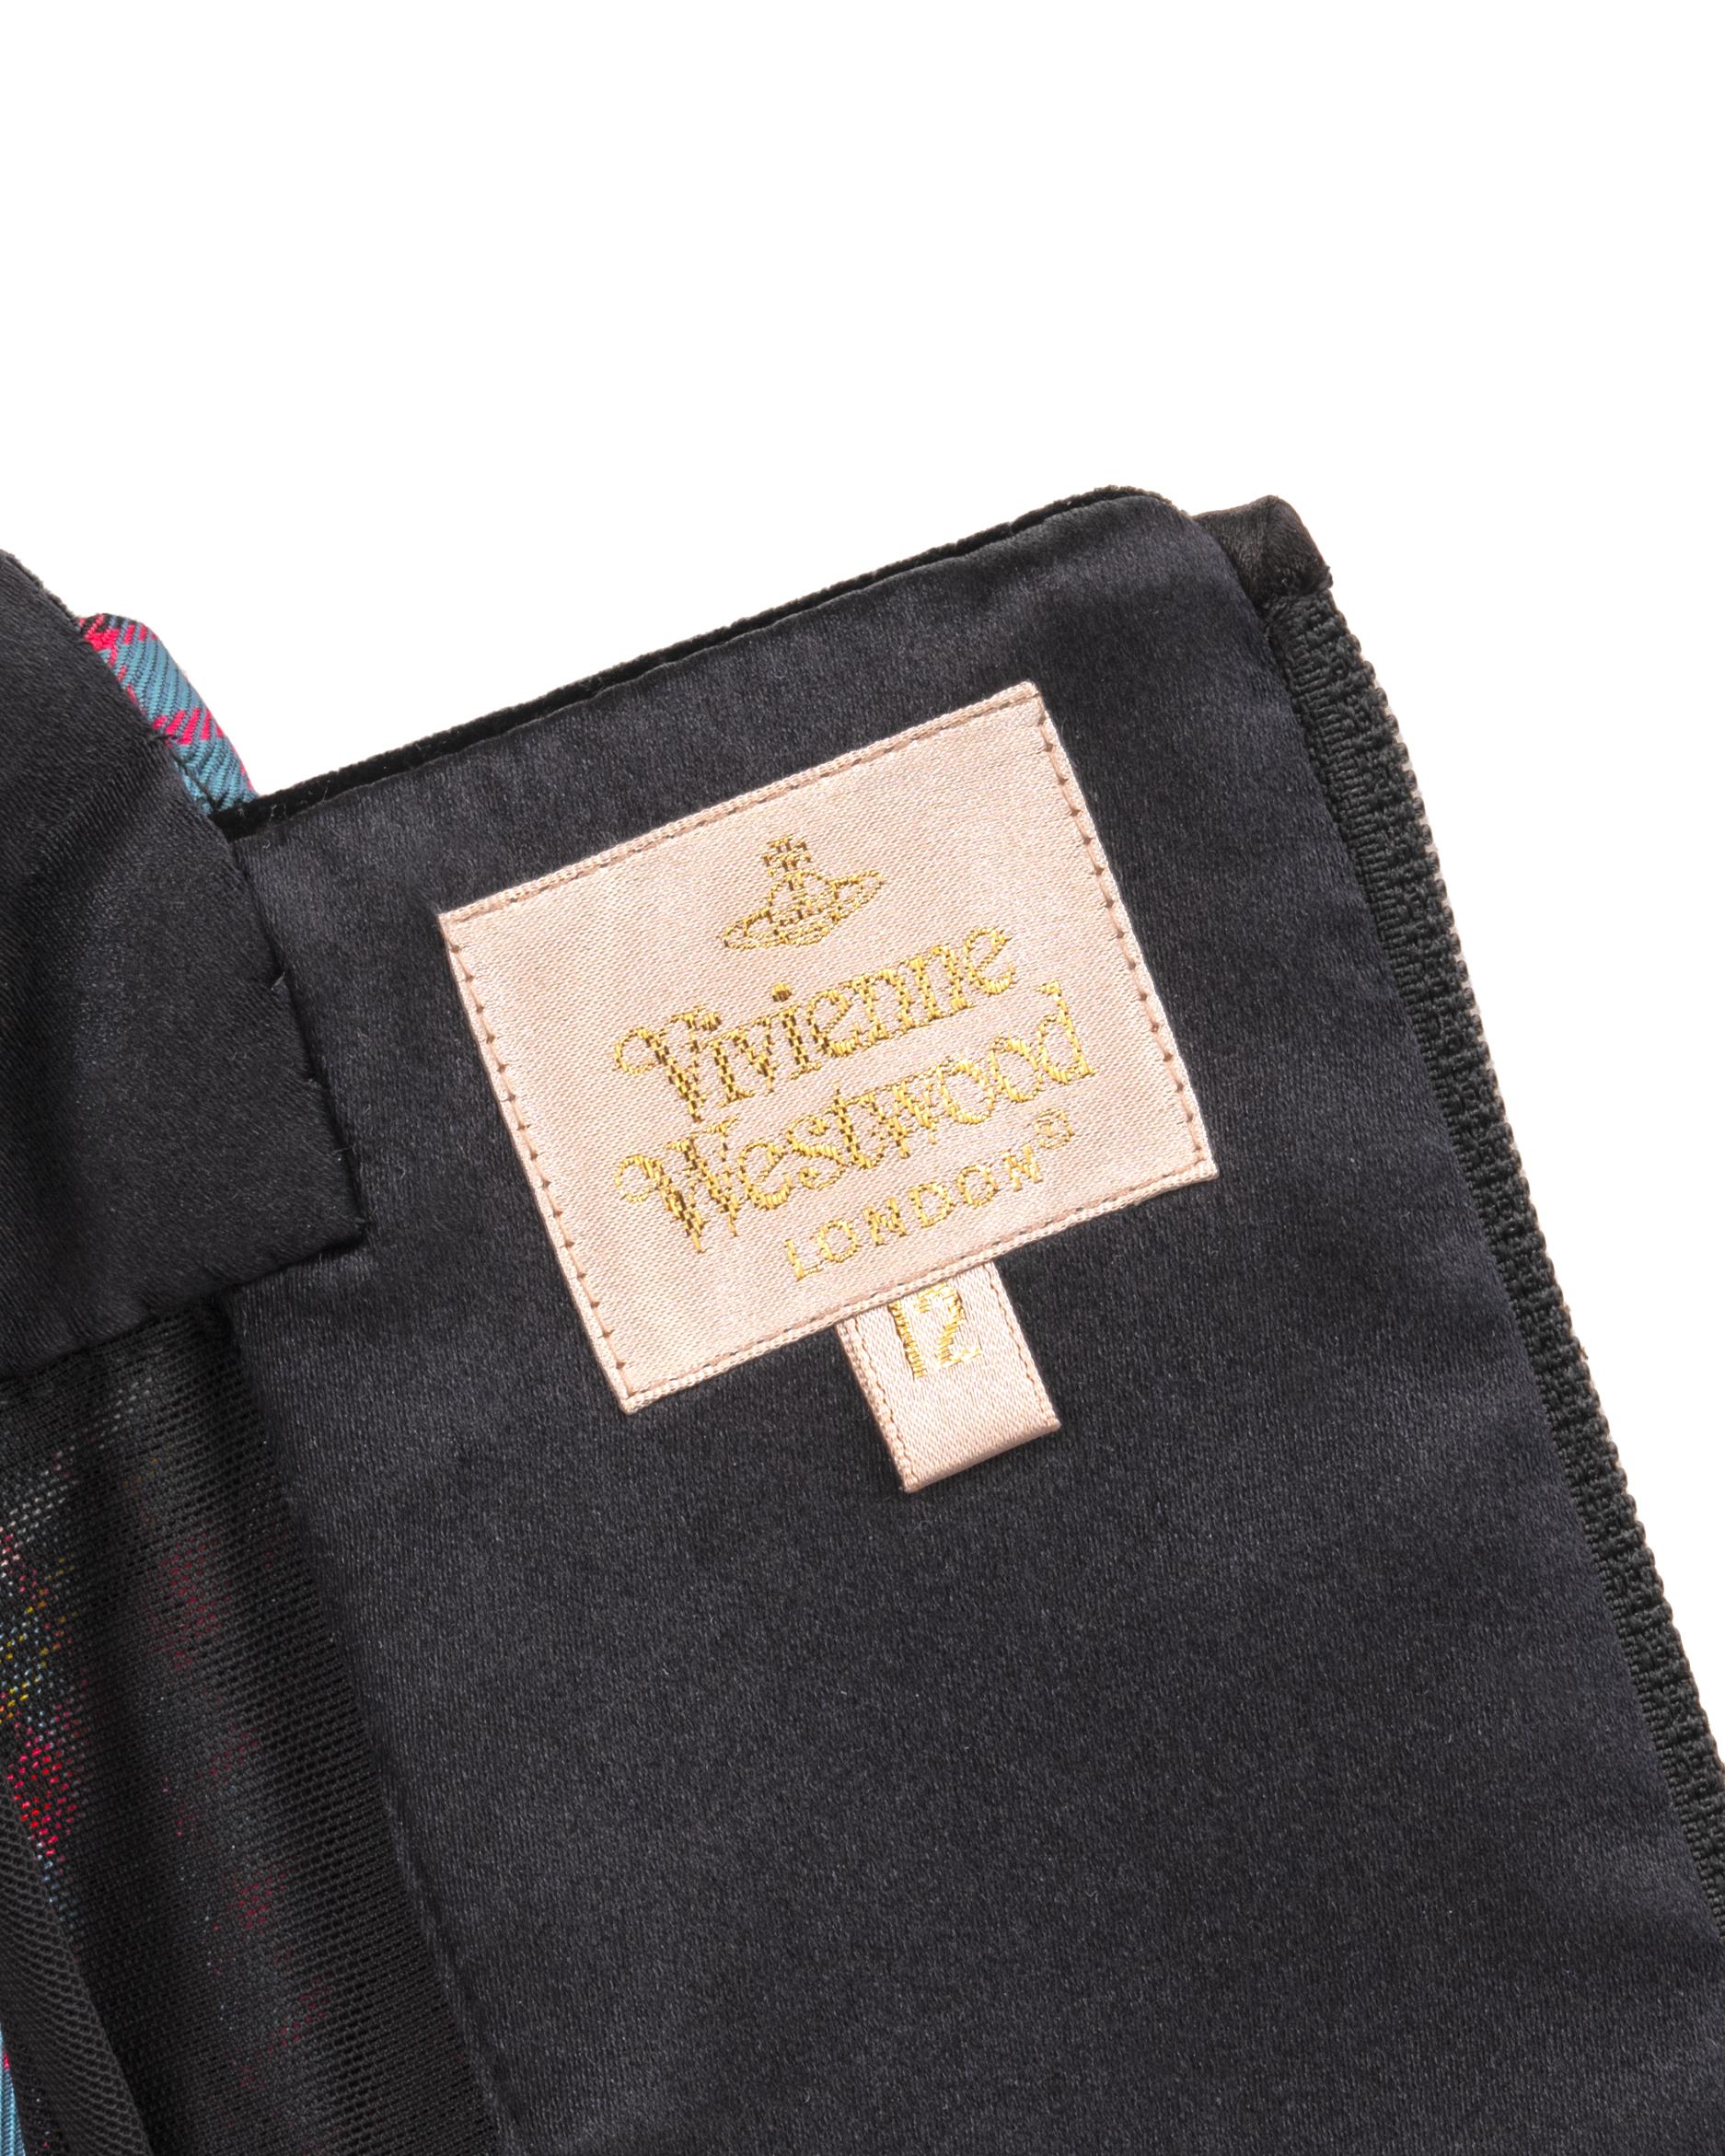  Vivienne Westwood black velvet and tartan silk corset with crystals, fw 1993 For Sale 10